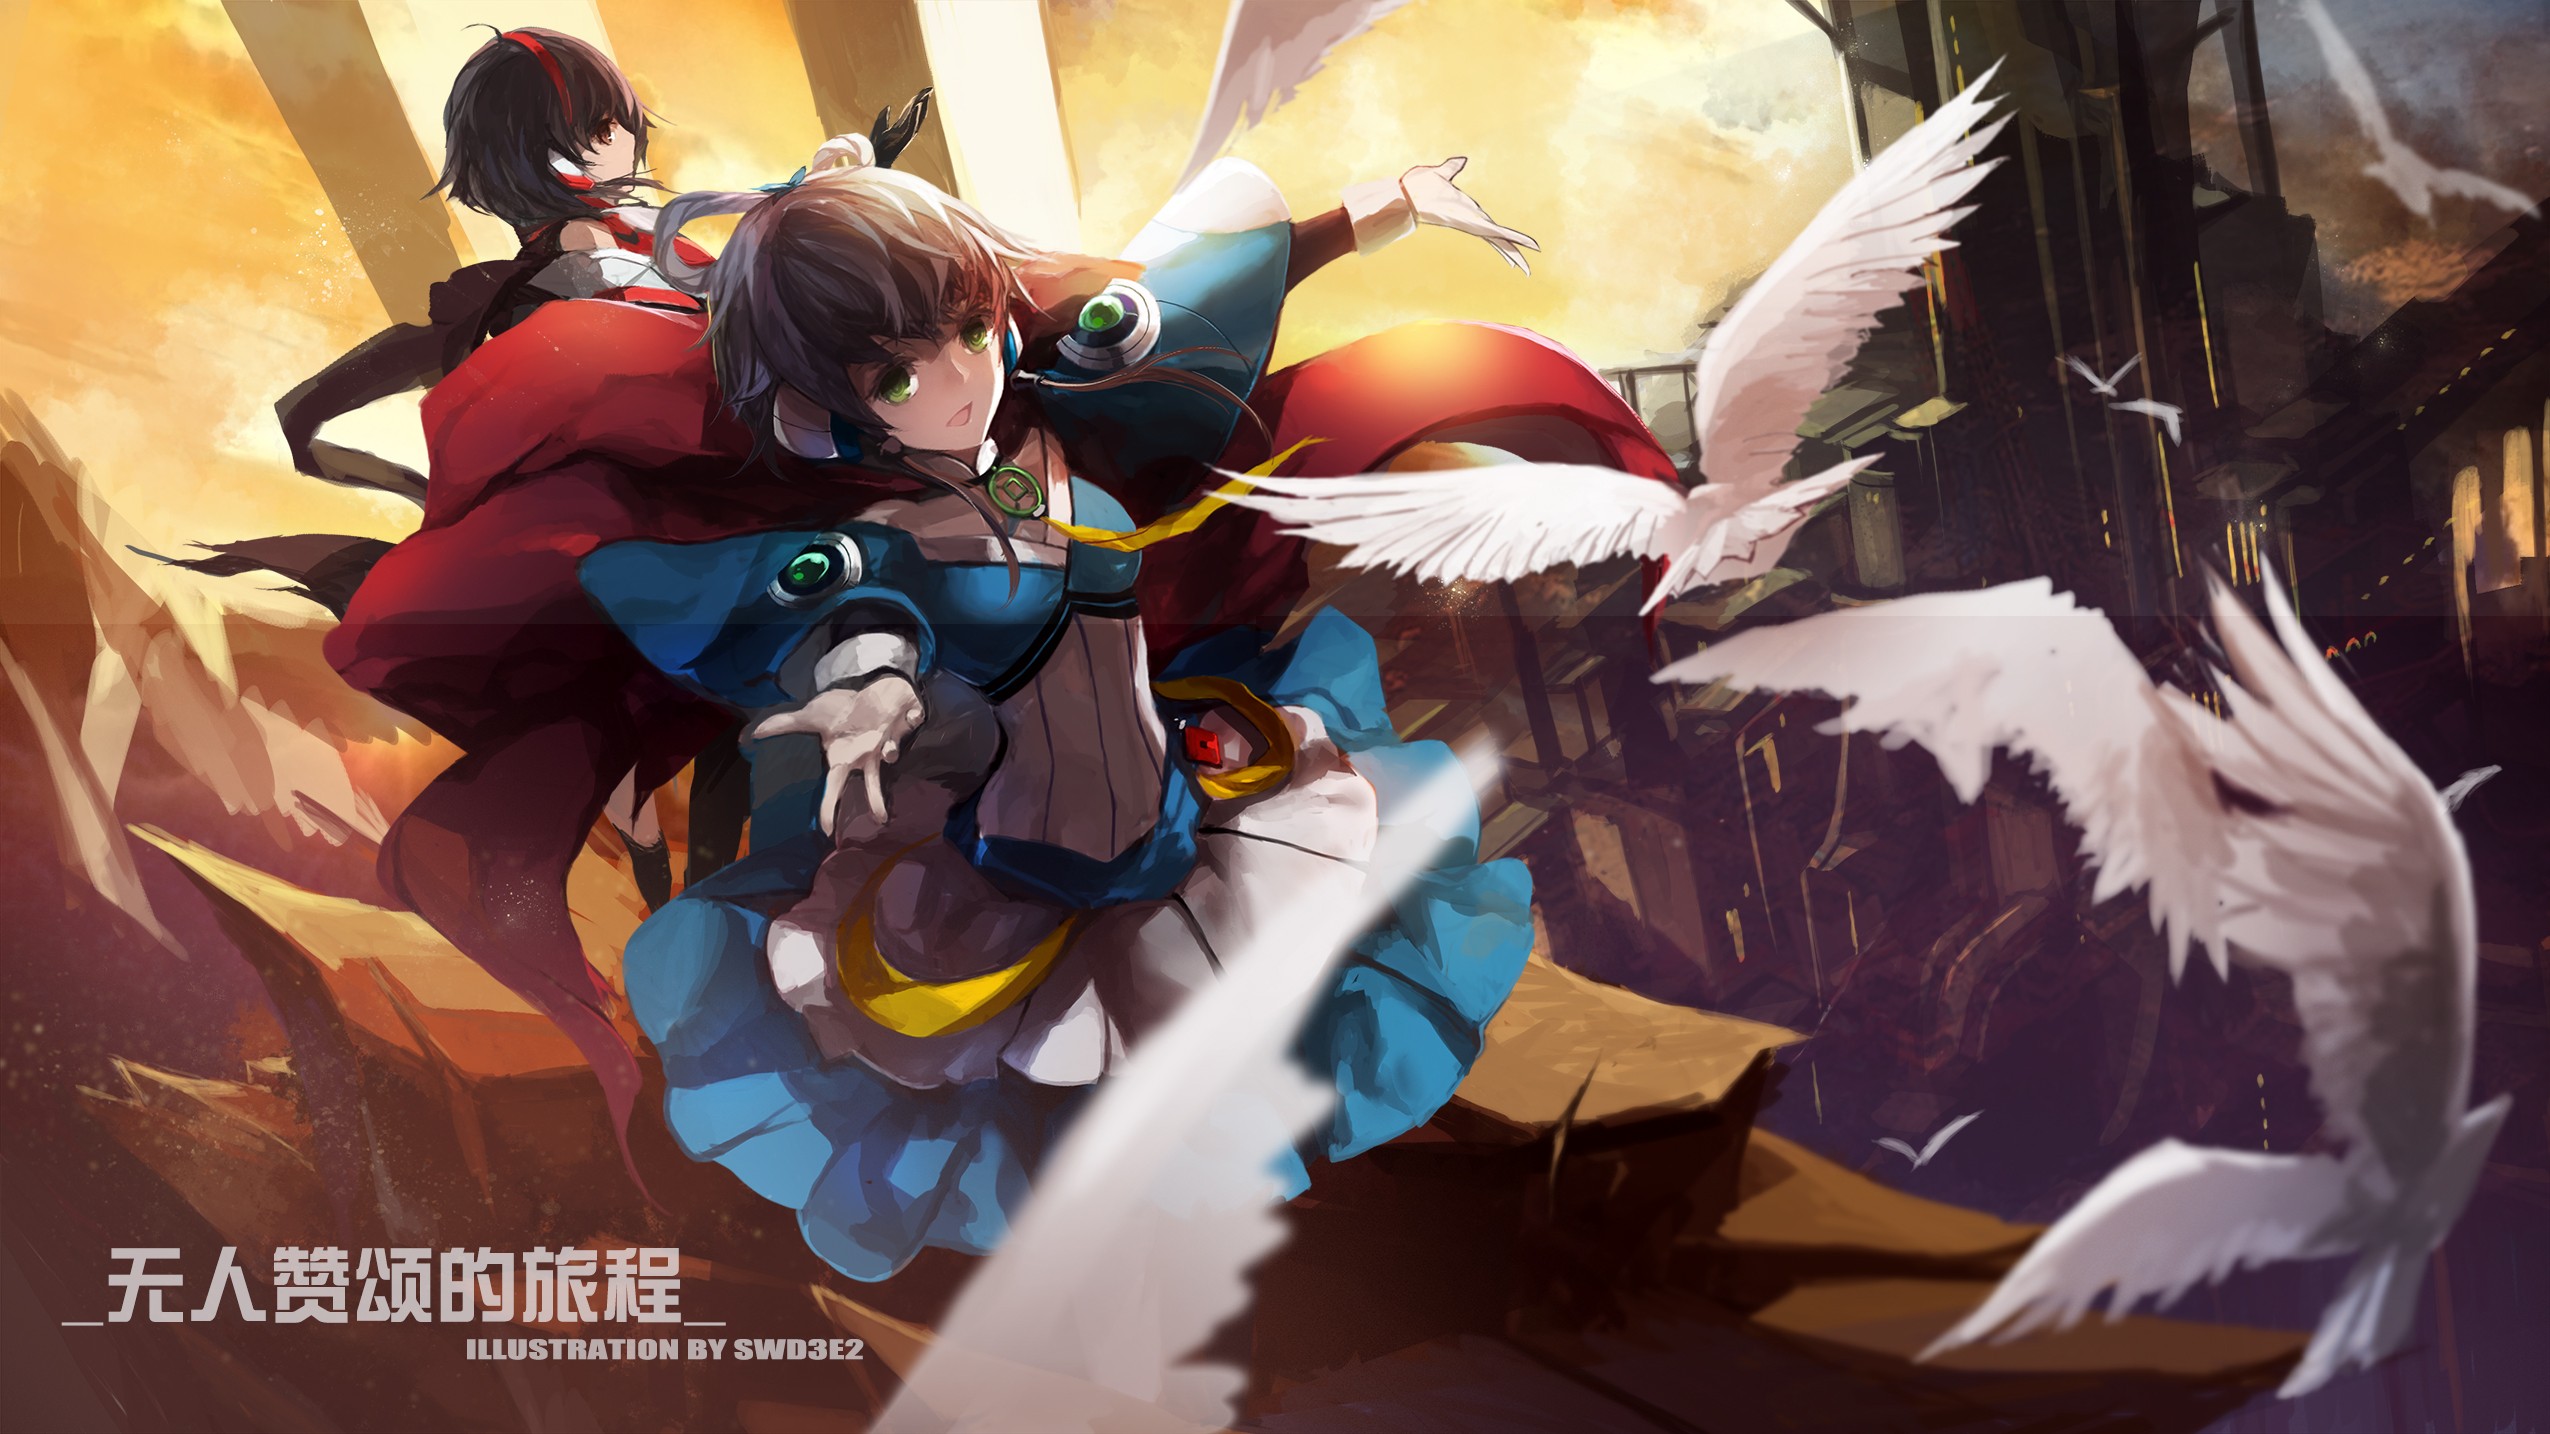 Anime 2550x1434 Swd3e2 anime girls Vocaloid Luo Tianyi (vocaloid) Yuezheng Ling black hair brown eyes birds dress gloves gray hair green eyes